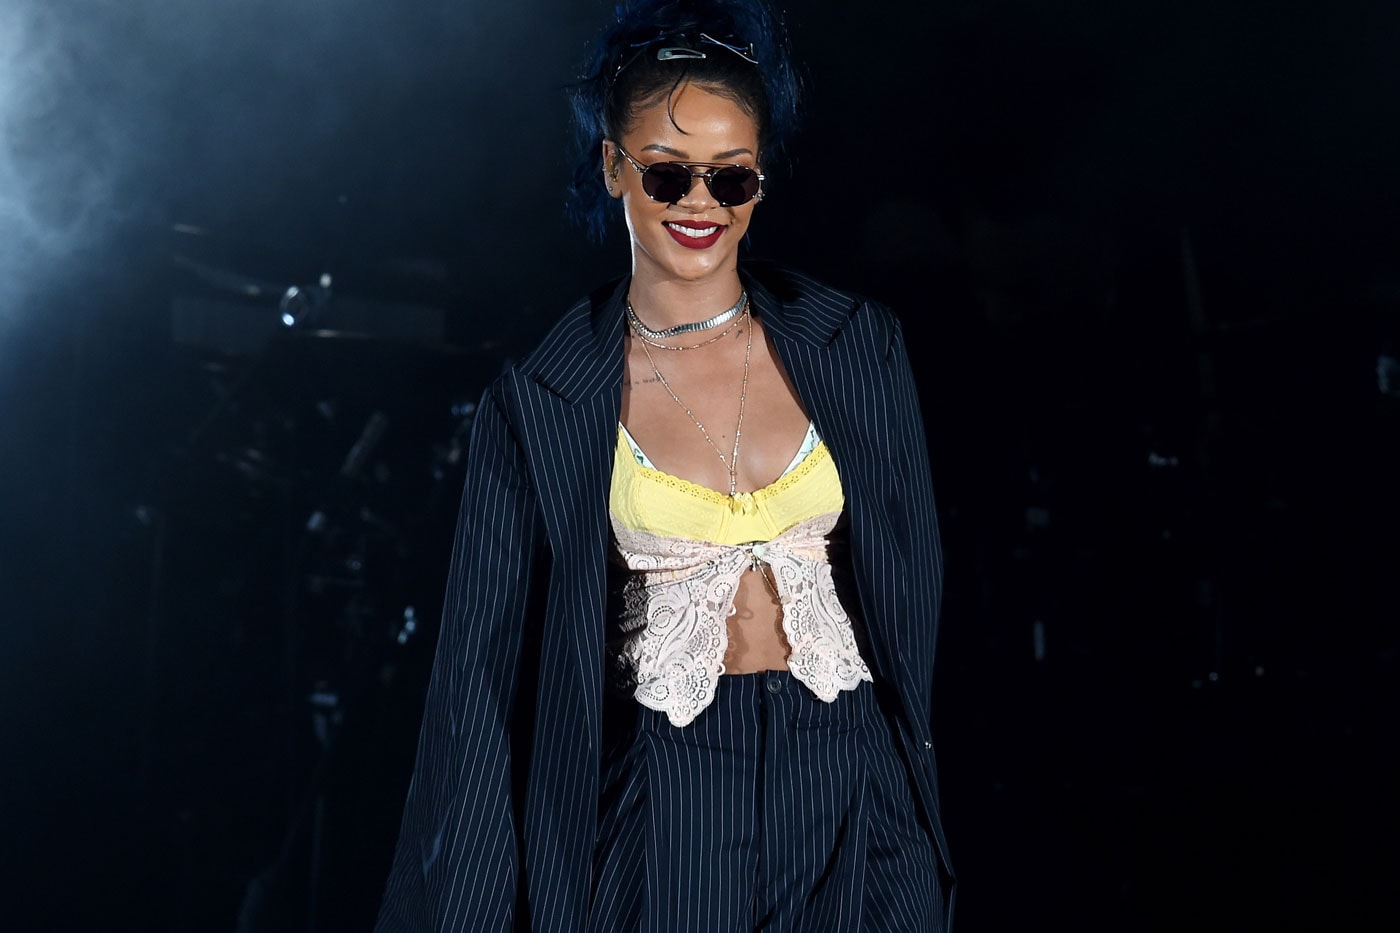 Rihanna Is Excited About Her Purchase of Travi$ Scott's 'Rodeo'